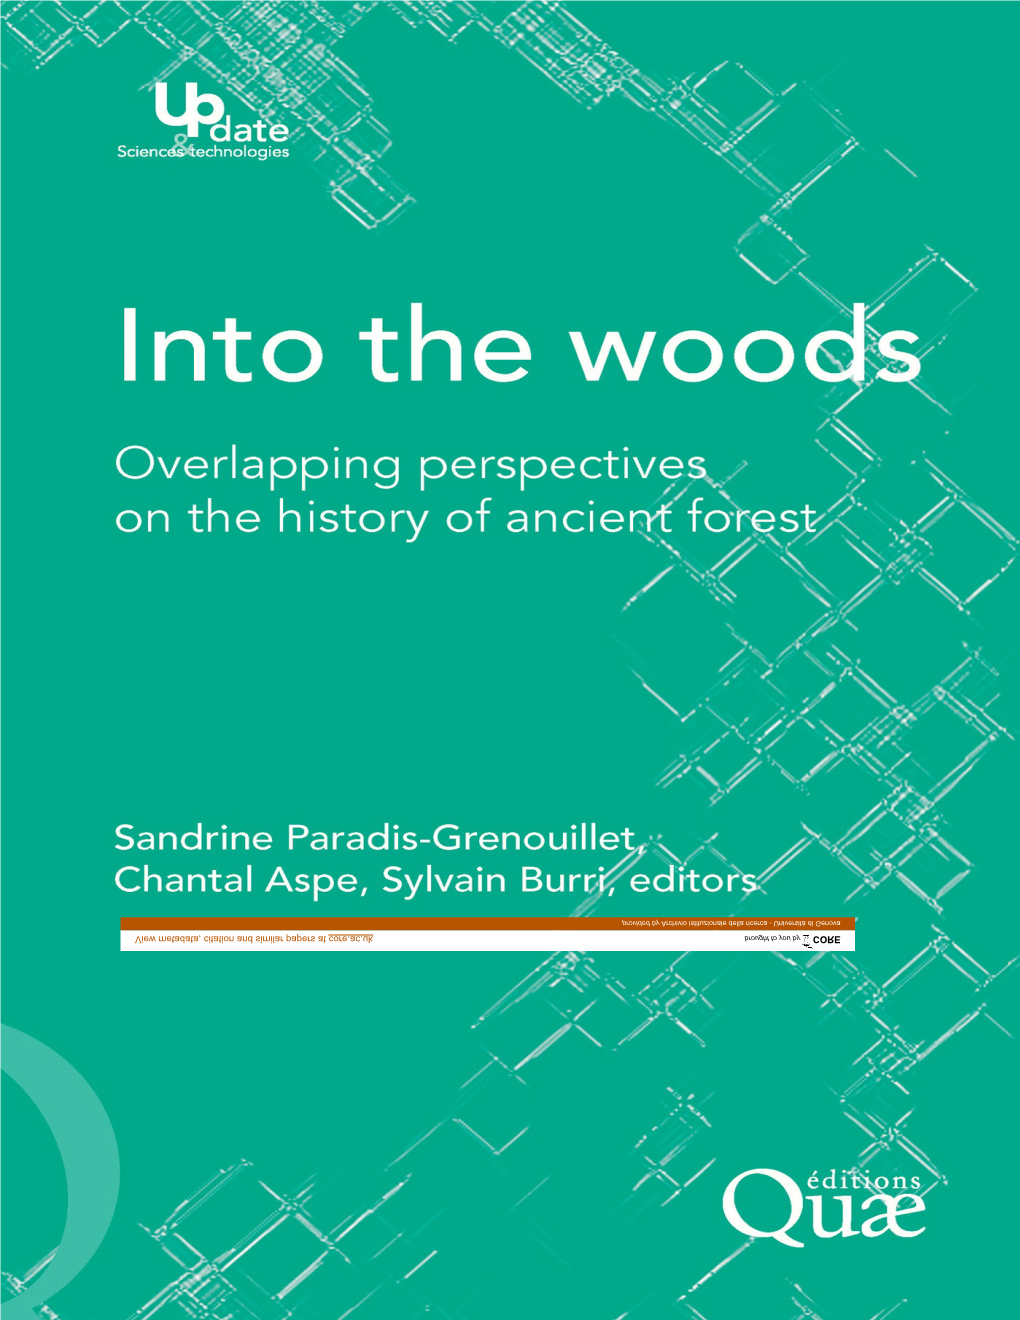 Overlapping Perspectives on the History of Ancient Forests